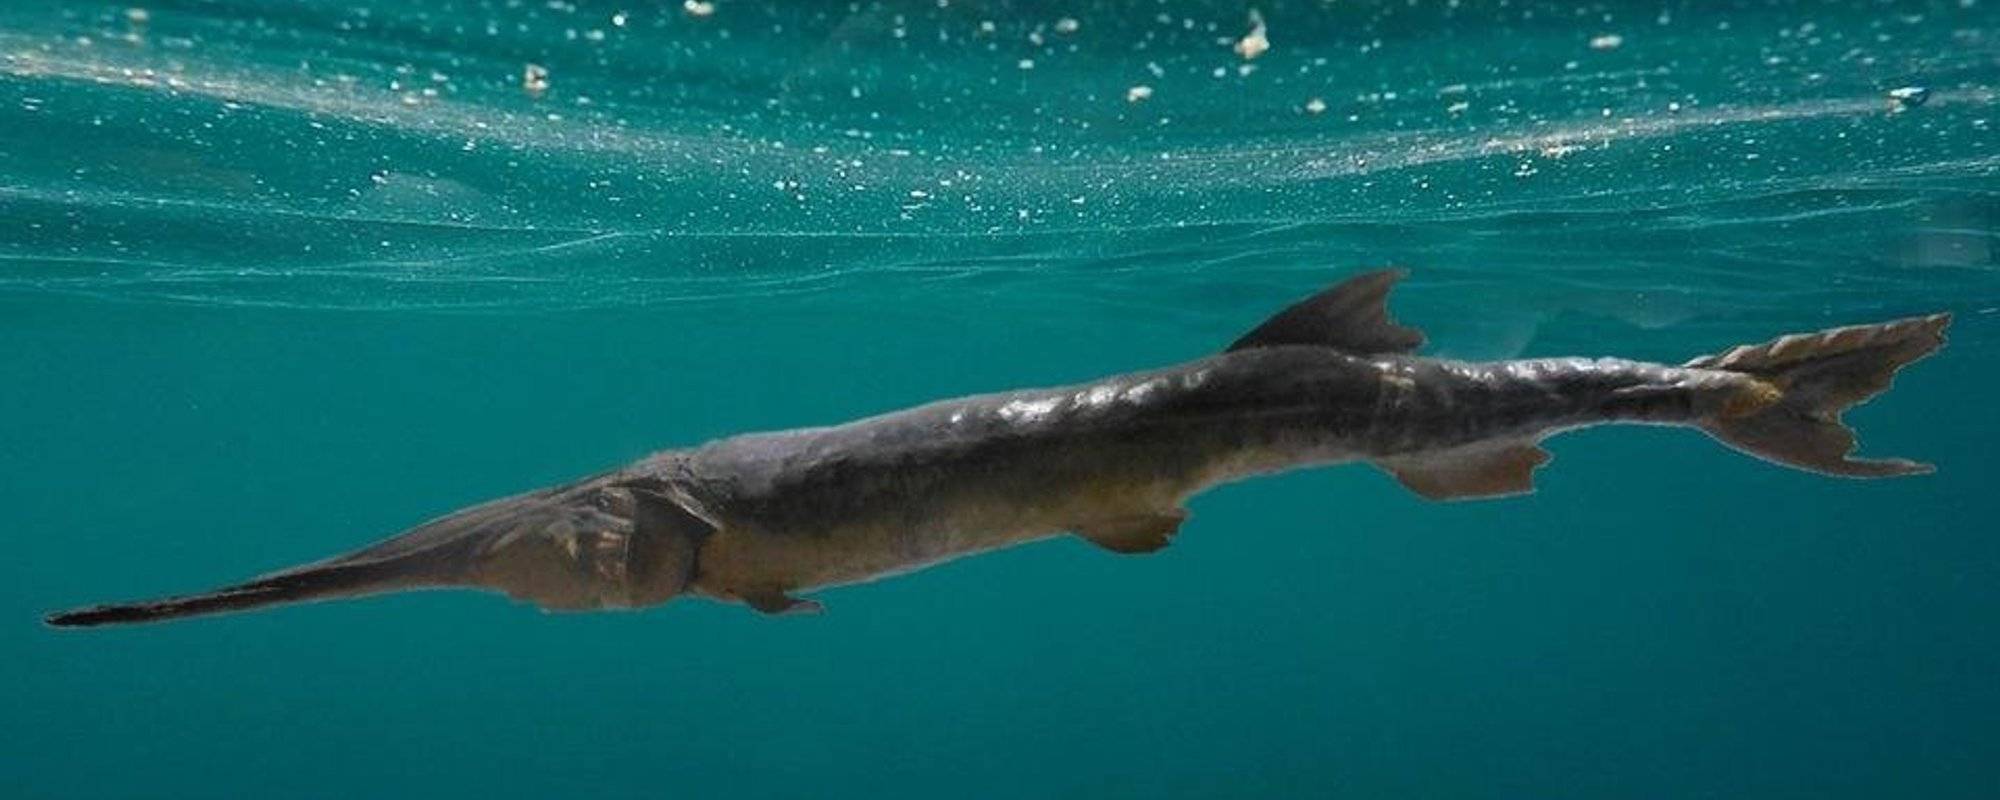 Sad news for nature lovers: we just lost another fish species forever